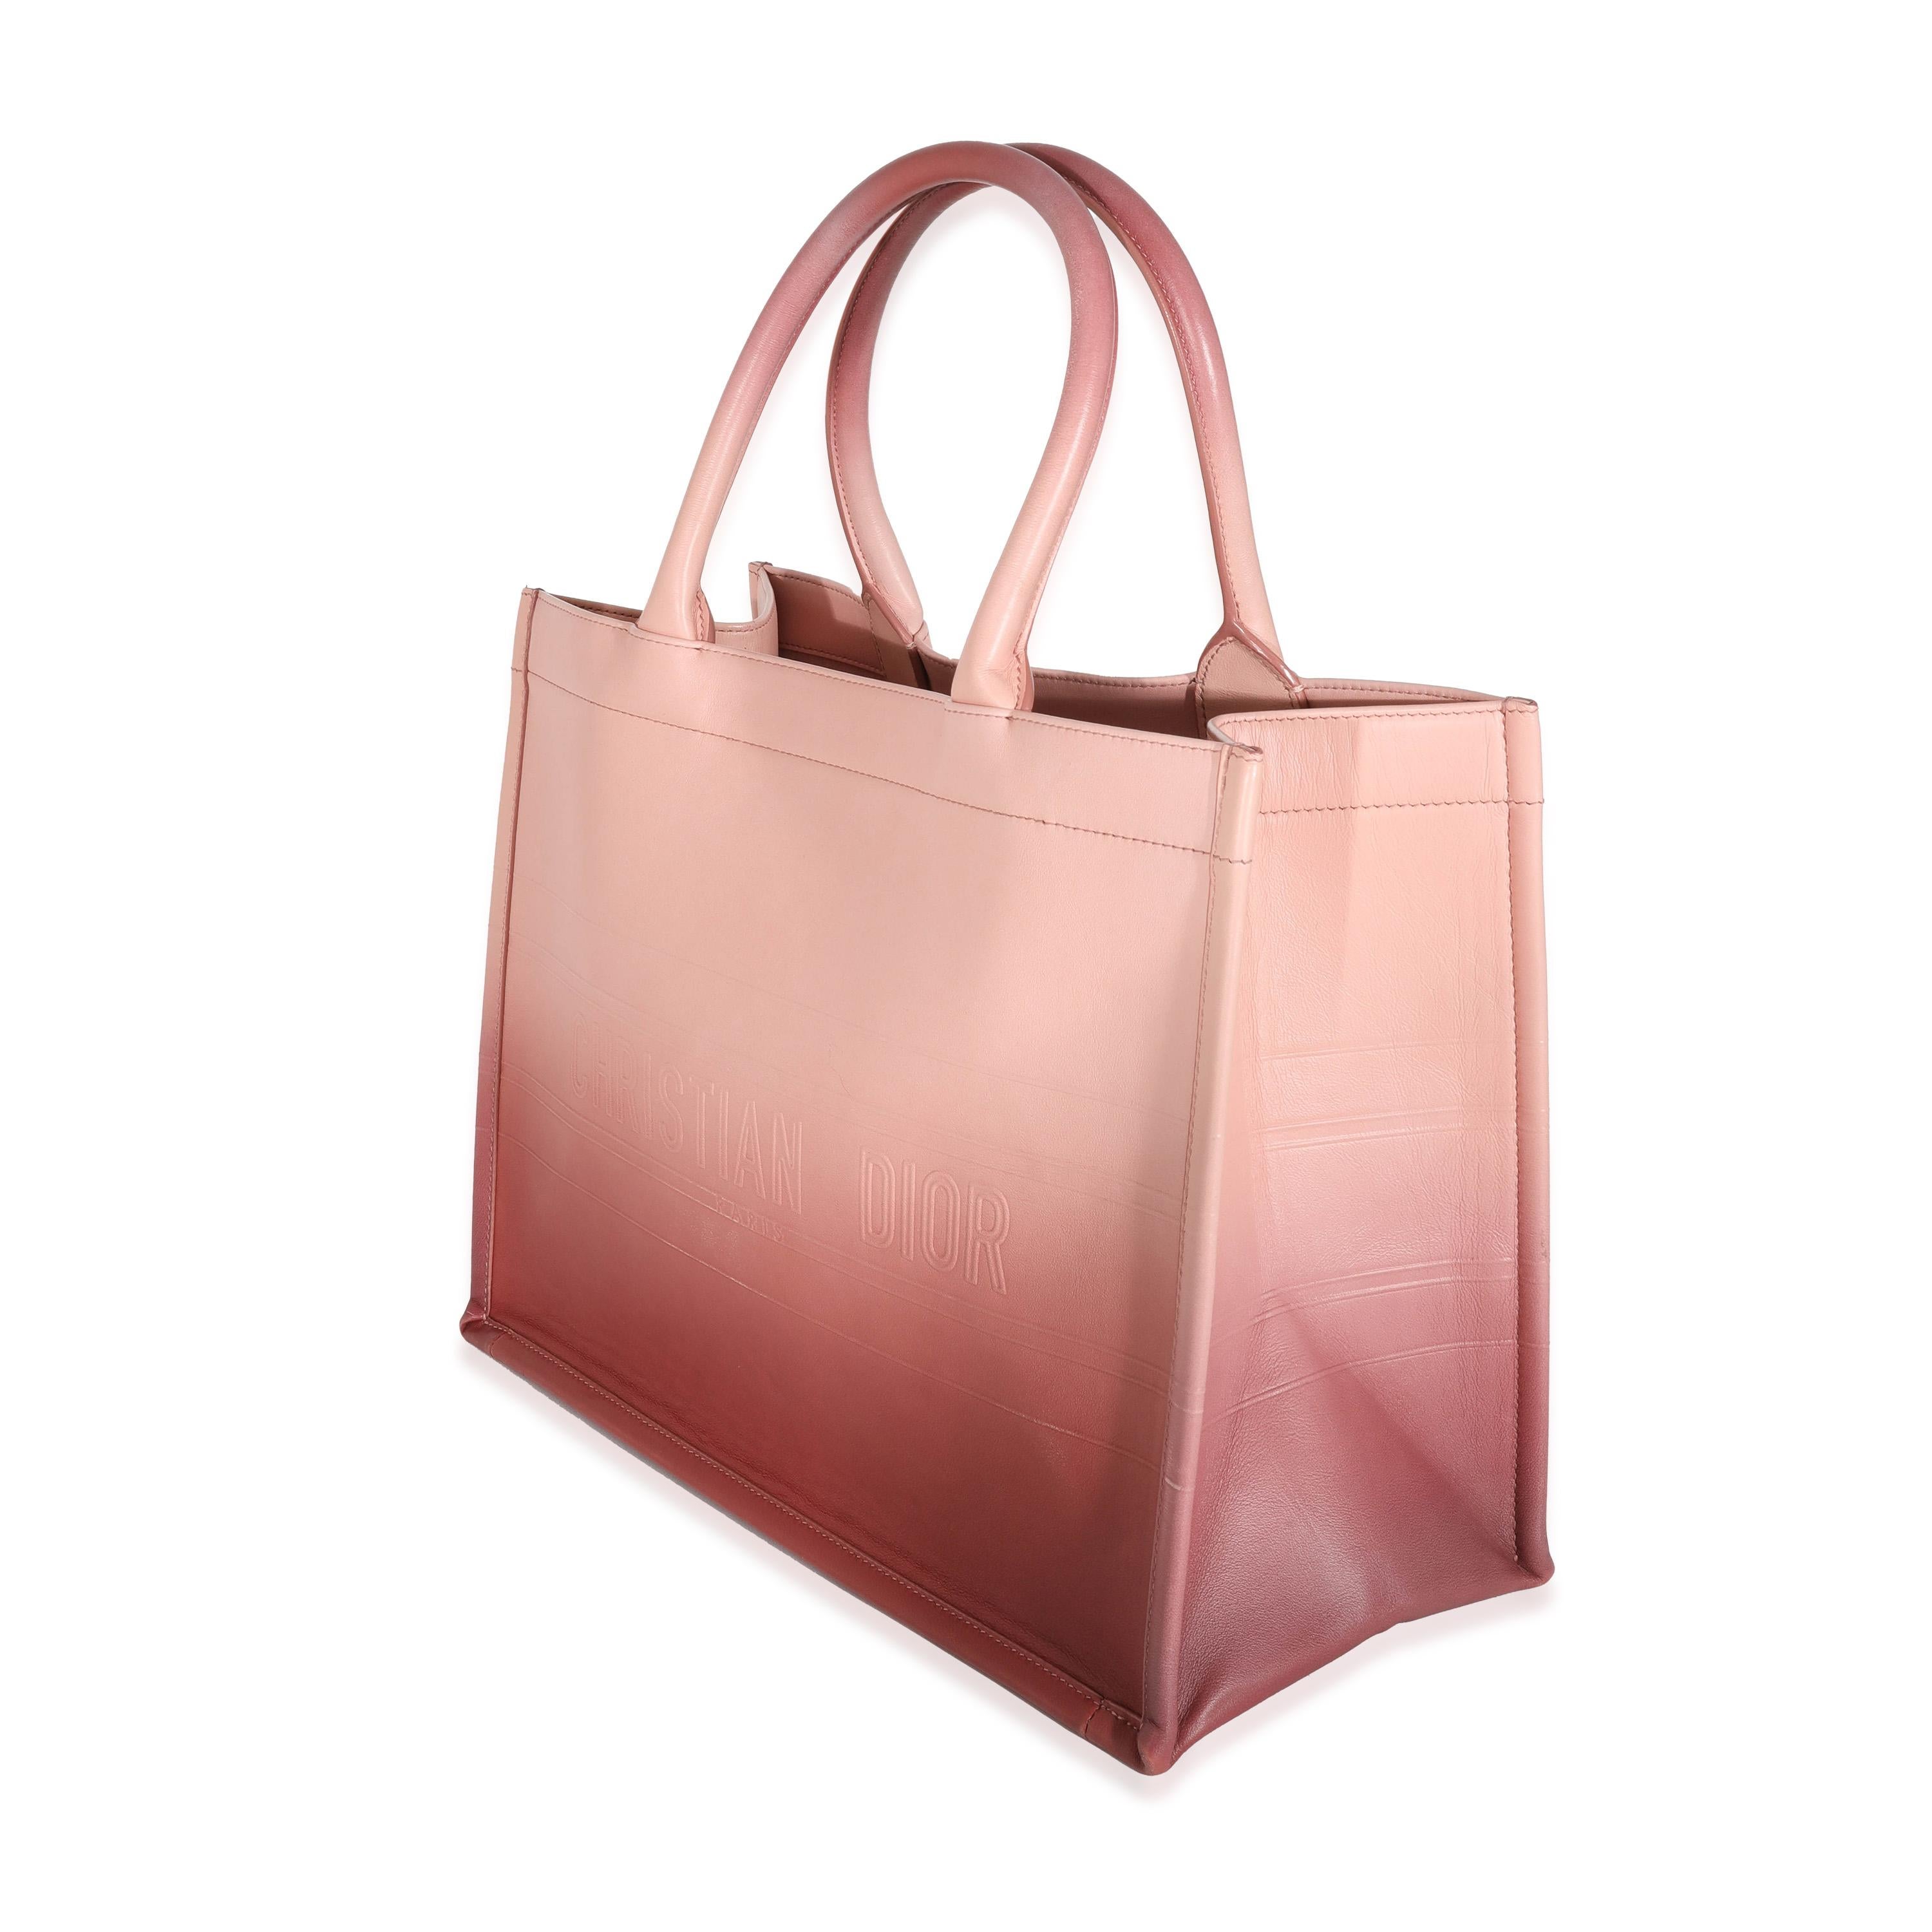 Christian Dior Pink Gradient Leather Medium Book Tote In Excellent Condition For Sale In New York, NY